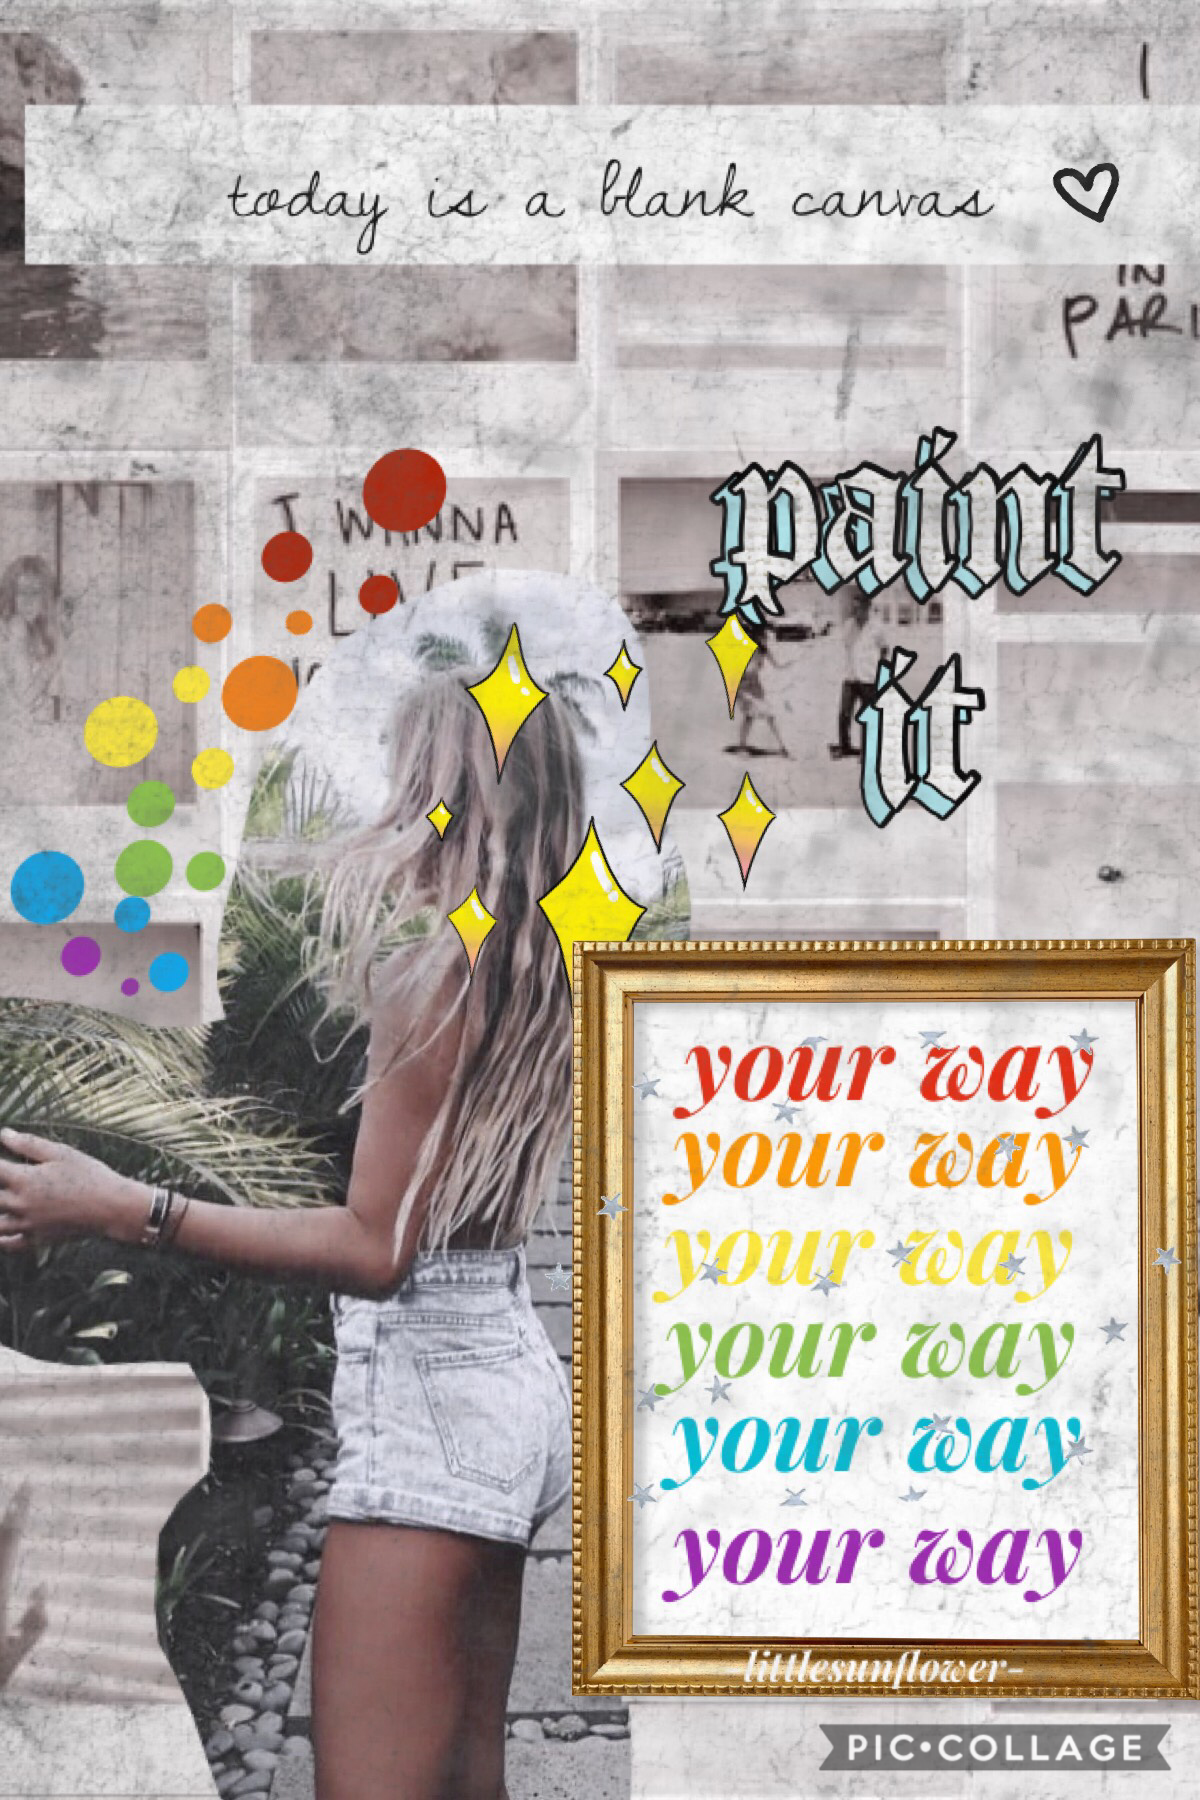 💛t a p💛
i like my yesterday one better, what do you think? lmk ideas and criticisms in the comments 💕 cat